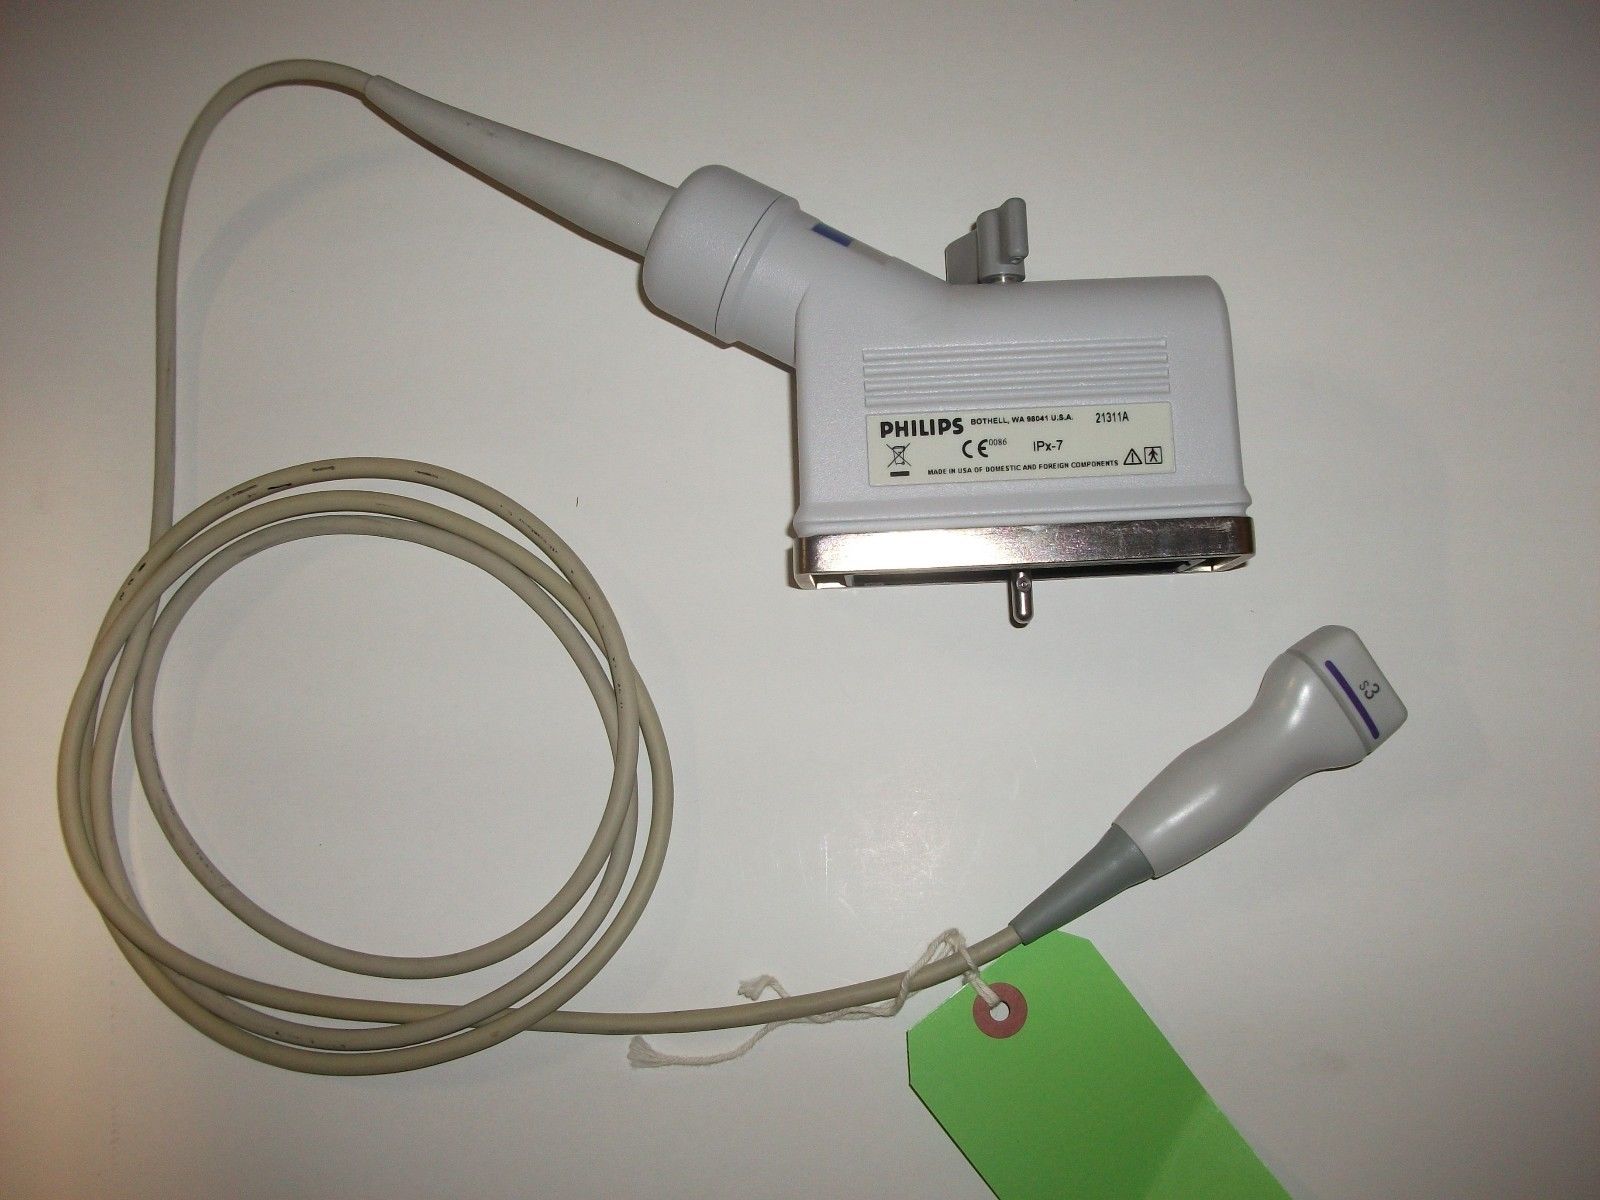 Philips/HP S3 Transducer Probe for Philips Ultrasound Systems